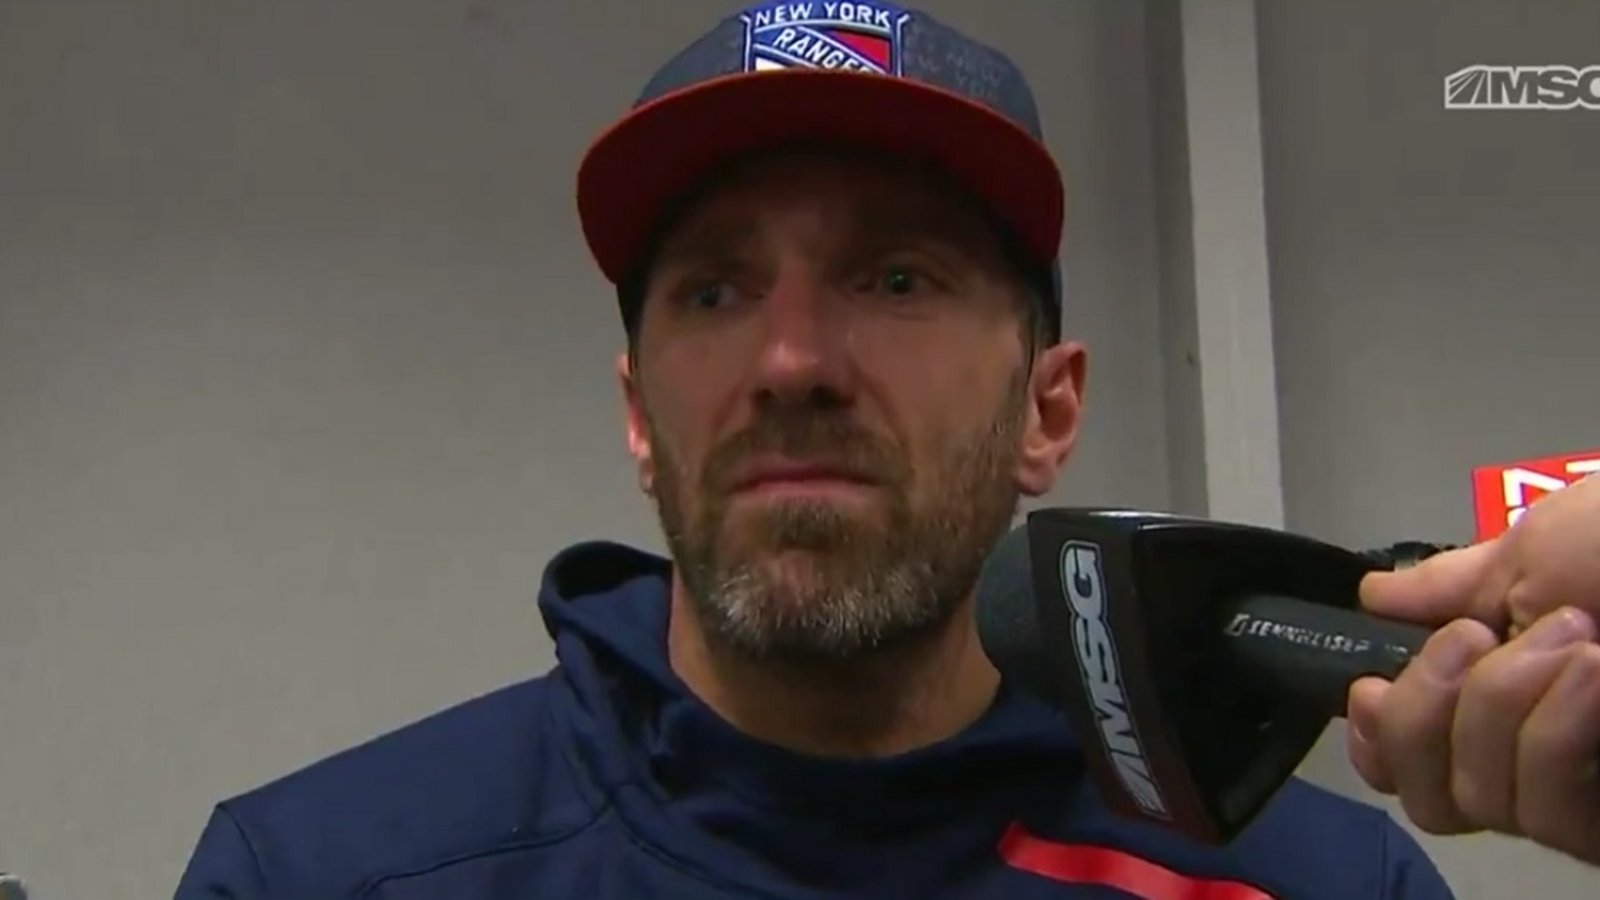 Henrik Lundqvist breaks down in tears when asked about trade of Mats Zuccarello.